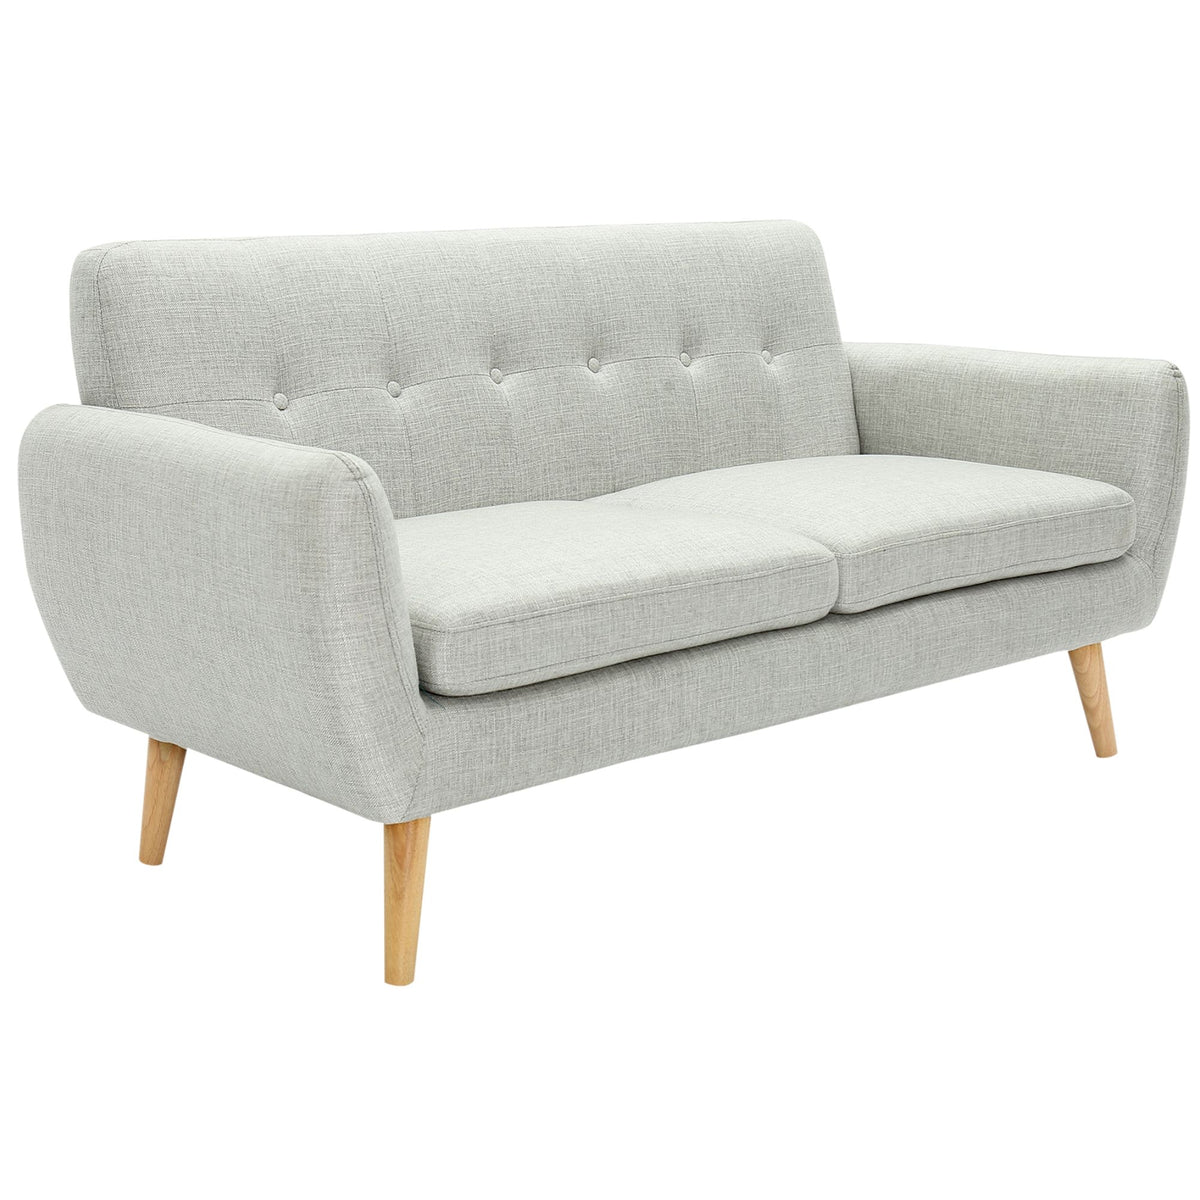 Dane 3 Seater Fabric Upholstered Sofa Lounge Couch - Light Grey.